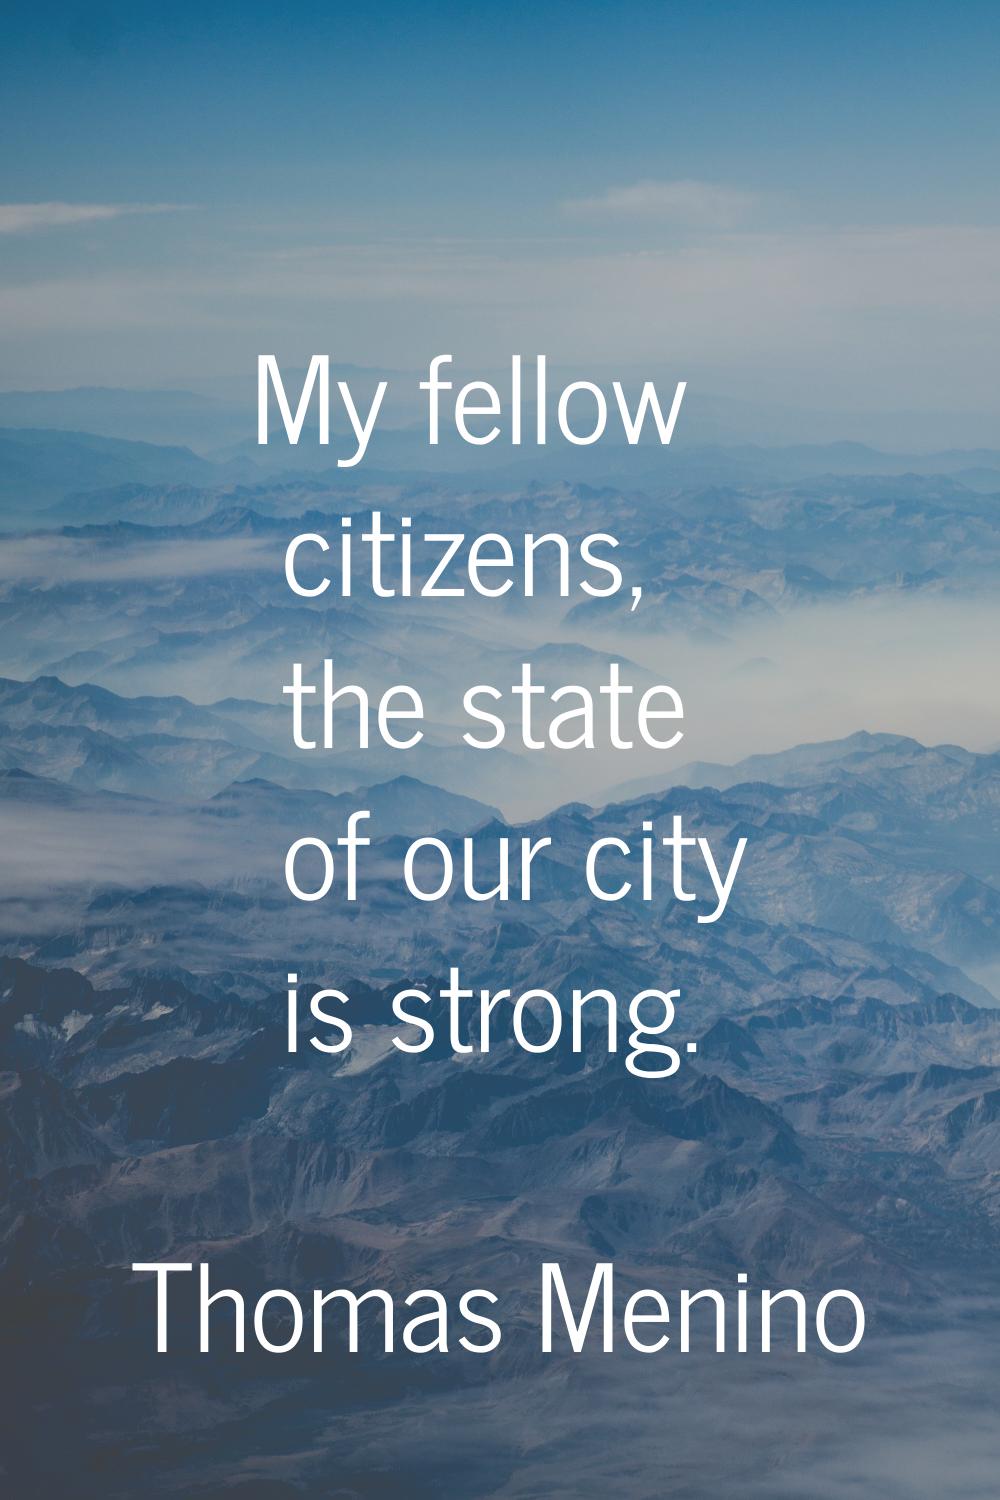 My fellow citizens, the state of our city is strong.